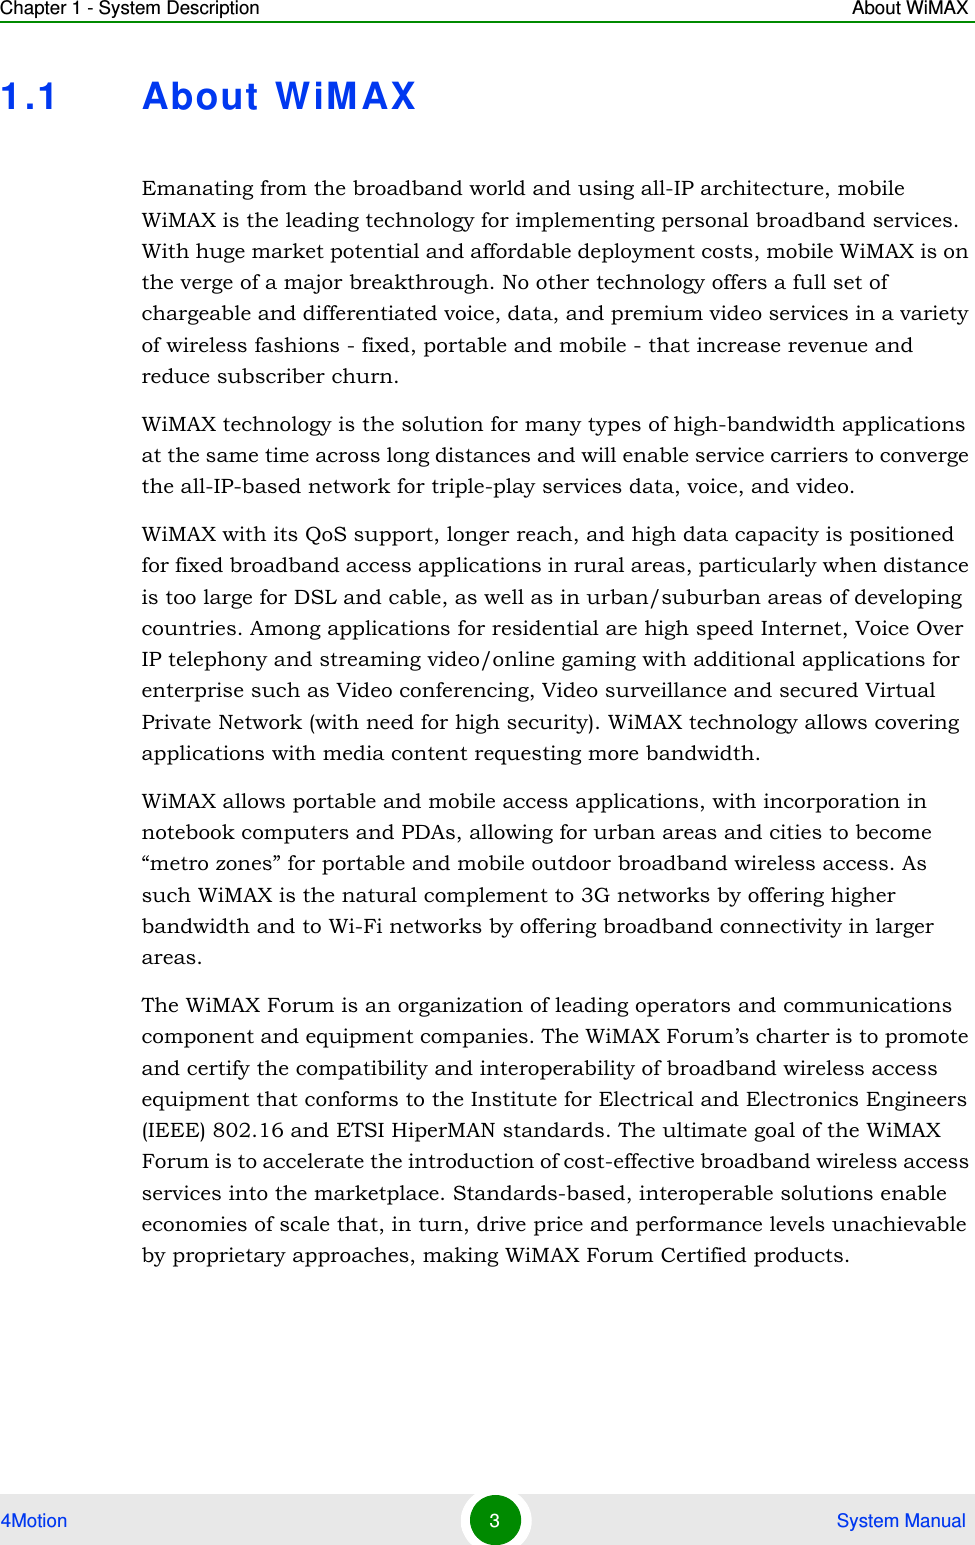 Chapter 1 - System Description About WiMAX4Motion 3 System Manual1.1 About WiMAXEmanating from the broadband world and using all-IP architecture, mobile WiMAX is the leading technology for implementing personal broadband services. With huge market potential and affordable deployment costs, mobile WiMAX is on the verge of a major breakthrough. No other technology offers a full set of chargeable and differentiated voice, data, and premium video services in a variety of wireless fashions - fixed, portable and mobile - that increase revenue and reduce subscriber churn.WiMAX technology is the solution for many types of high-bandwidth applications at the same time across long distances and will enable service carriers to converge the all-IP-based network for triple-play services data, voice, and video.WiMAX with its QoS support, longer reach, and high data capacity is positioned for fixed broadband access applications in rural areas, particularly when distance is too large for DSL and cable, as well as in urban/suburban areas of developing countries. Among applications for residential are high speed Internet, Voice Over IP telephony and streaming video/online gaming with additional applications for enterprise such as Video conferencing, Video surveillance and secured Virtual Private Network (with need for high security). WiMAX technology allows covering applications with media content requesting more bandwidth.WiMAX allows portable and mobile access applications, with incorporation in notebook computers and PDAs, allowing for urban areas and cities to become “metro zones” for portable and mobile outdoor broadband wireless access. As such WiMAX is the natural complement to 3G networks by offering higher bandwidth and to Wi-Fi networks by offering broadband connectivity in larger areas.The WiMAX Forum is an organization of leading operators and communications component and equipment companies. The WiMAX Forum’s charter is to promote and certify the compatibility and interoperability of broadband wireless access equipment that conforms to the Institute for Electrical and Electronics Engineers (IEEE) 802.16 and ETSI HiperMAN standards. The ultimate goal of the WiMAX Forum is to accelerate the introduction of cost-effective broadband wireless access services into the marketplace. Standards-based, interoperable solutions enable economies of scale that, in turn, drive price and performance levels unachievable by proprietary approaches, making WiMAX Forum Certified products.